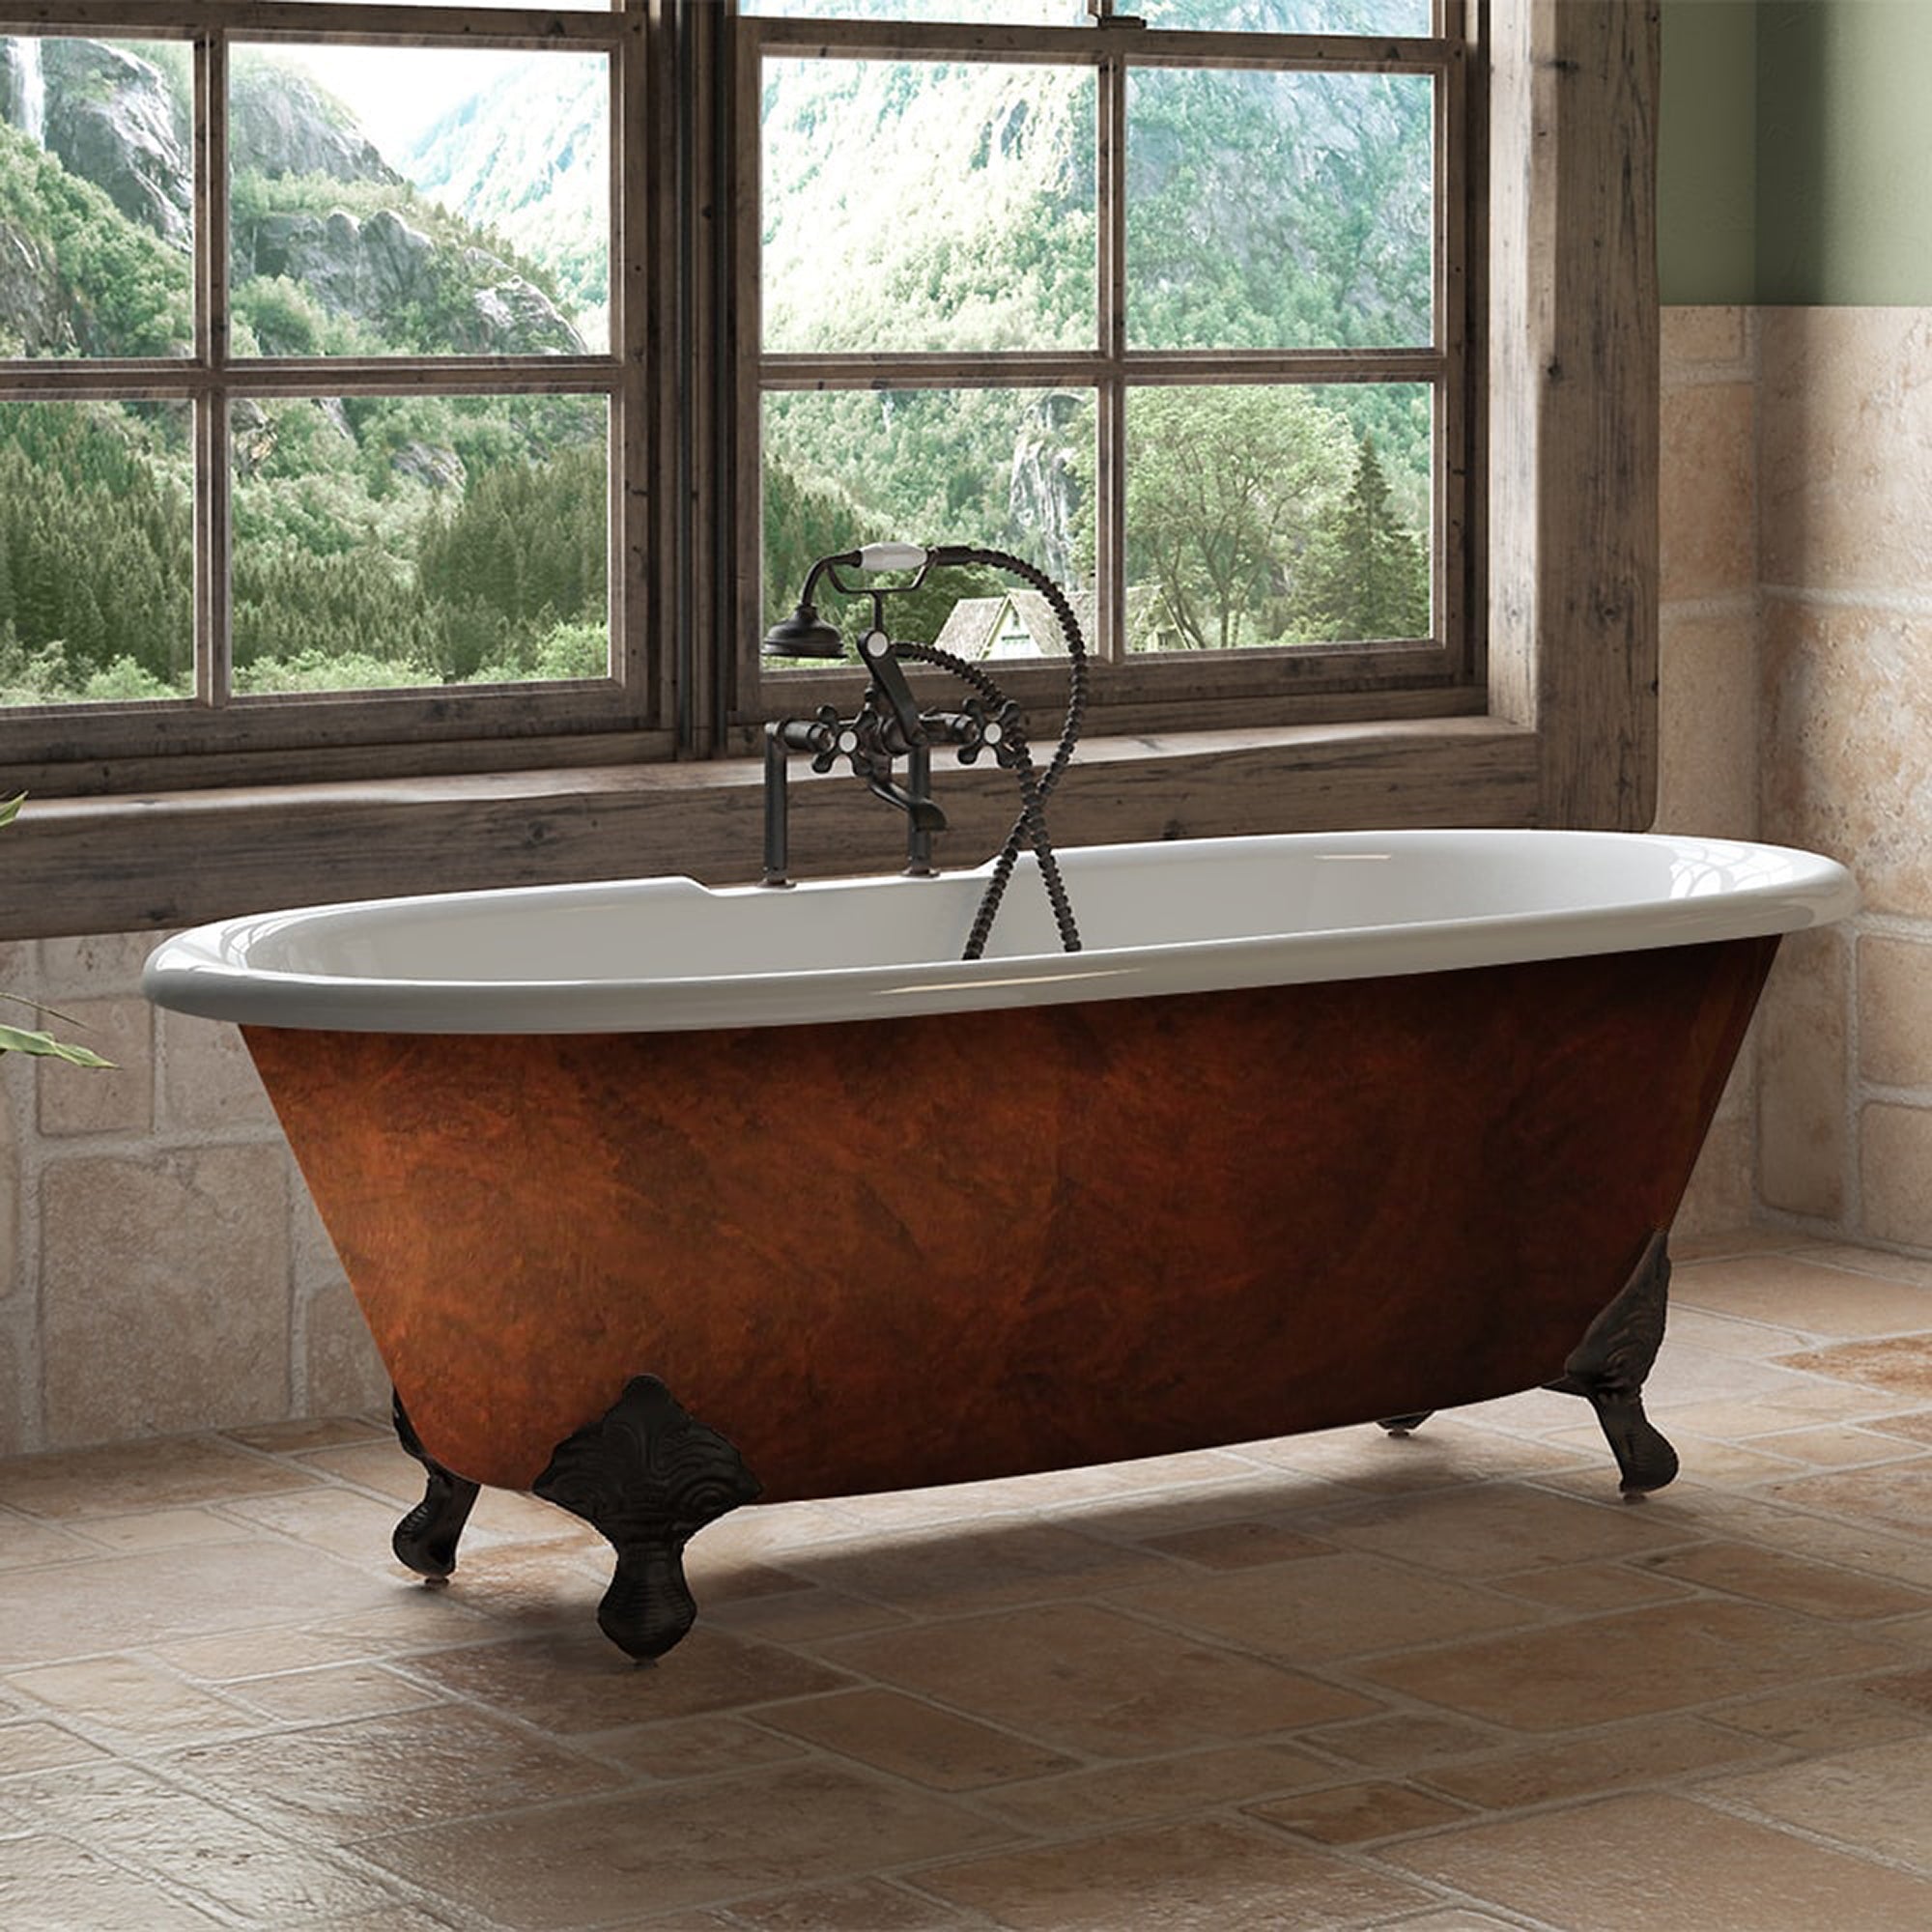 Cambridge Plumbing 67”x30" Faux Copper Bronze Finish on Exterior Cast Iron Clawfoot Bathtub (Hand Painted Faux Copper Bronze Finish) with 7" Deck Mount Faucet Drillings and Oil Rubbed Bronze Feet DE67-DH-ORB-CB - Vital Hydrotherapy